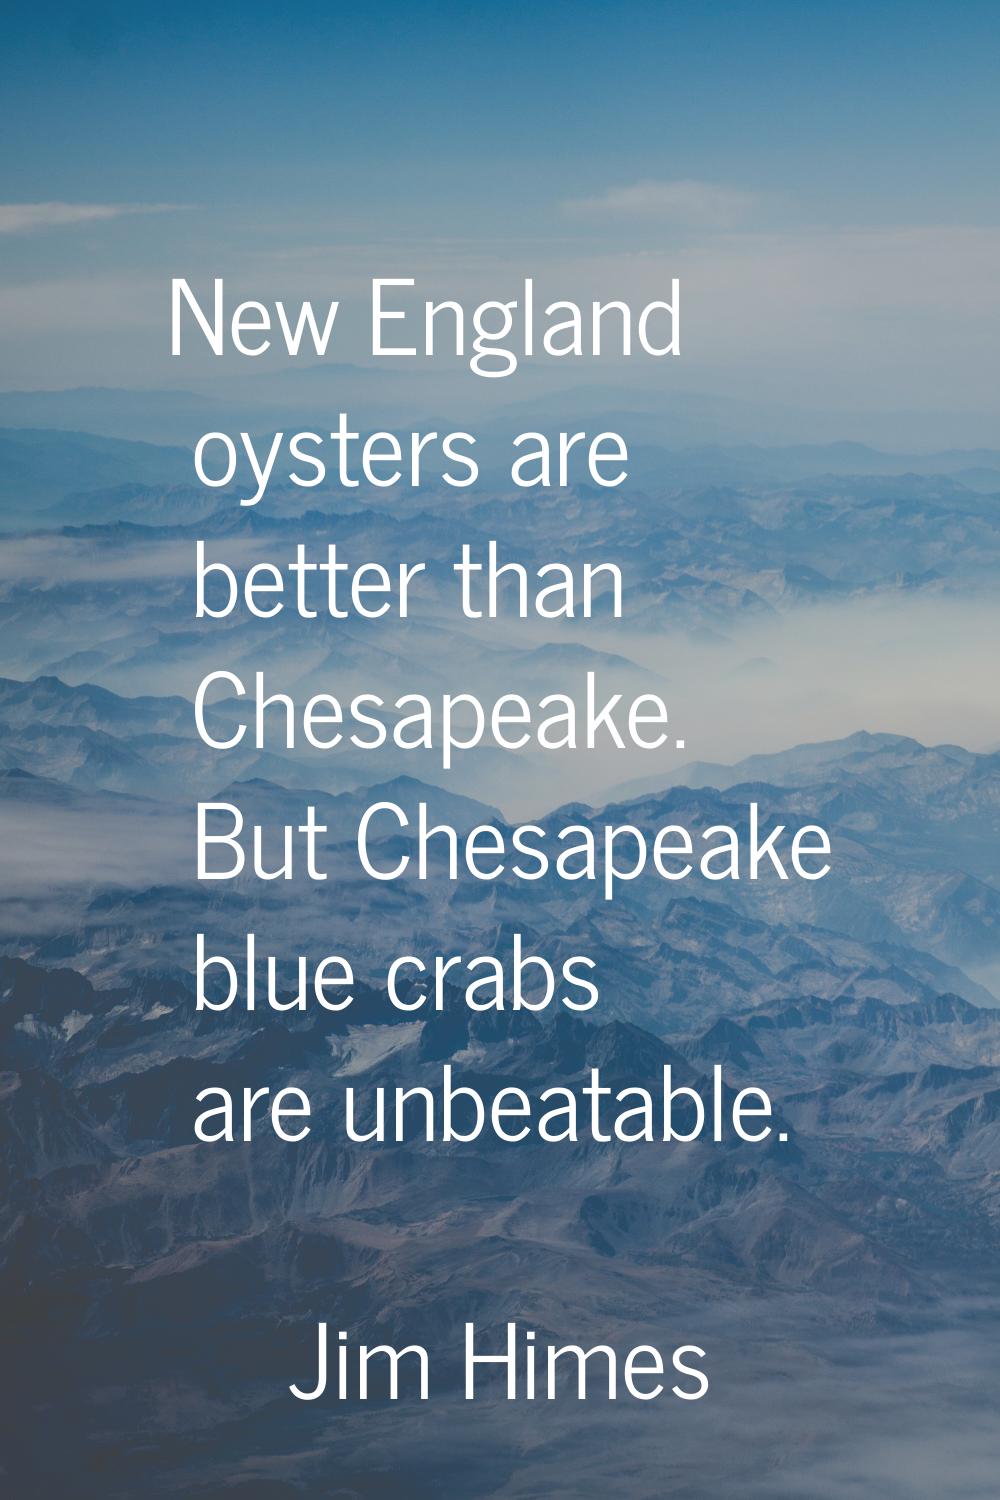 New England oysters are better than Chesapeake. But Chesapeake blue crabs are unbeatable.